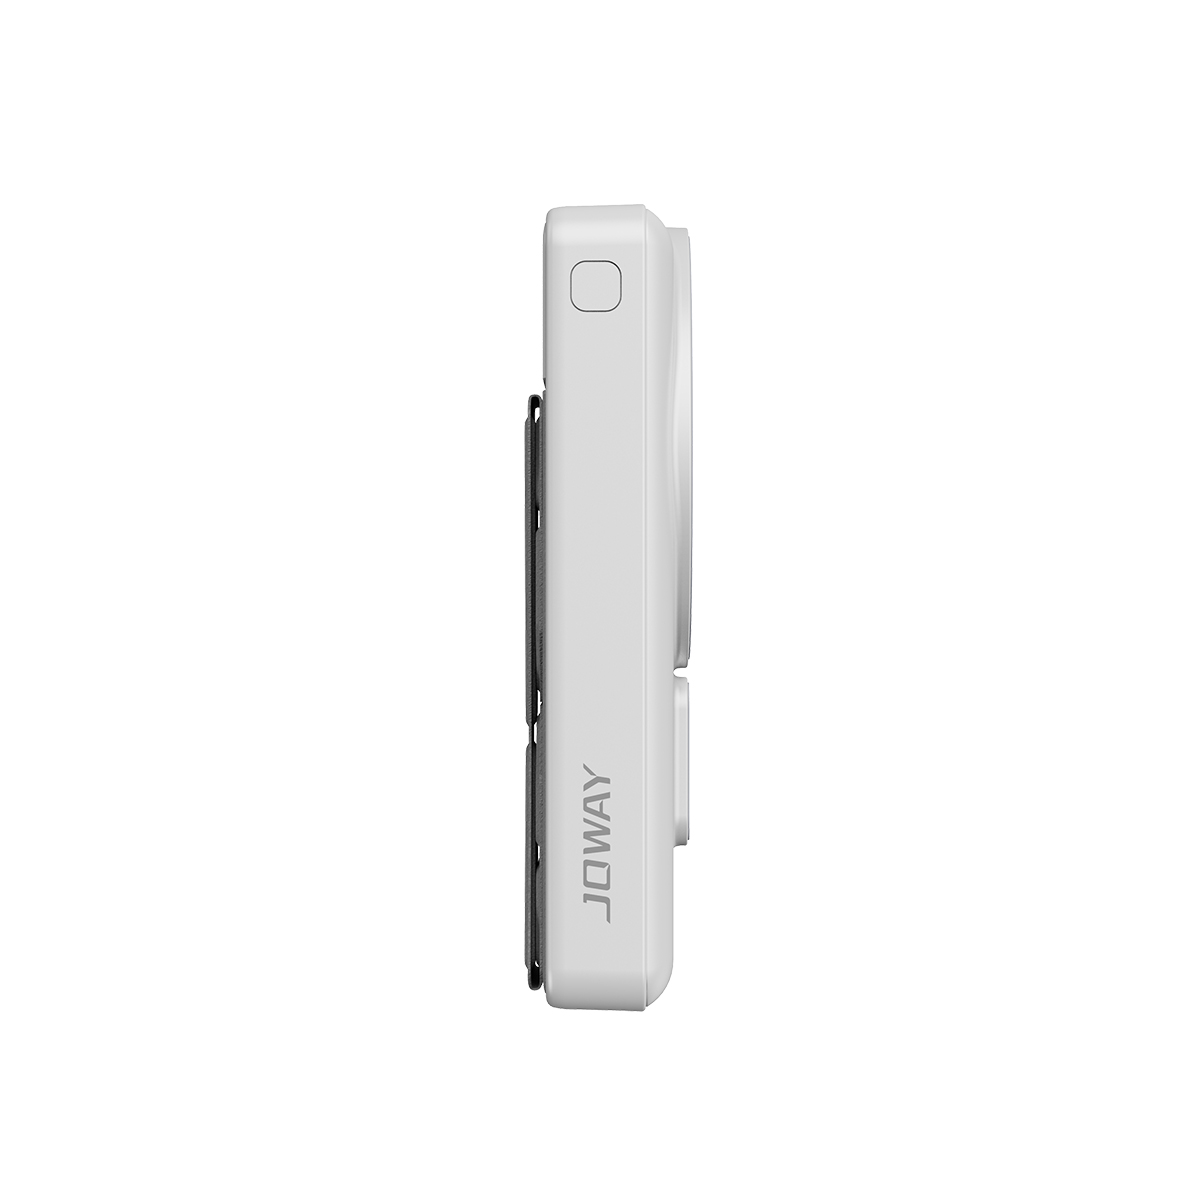 JOWAY JP510 Magnetic Wirelss Power Bank PD 20W 10000mAh with Foldable Stand, White